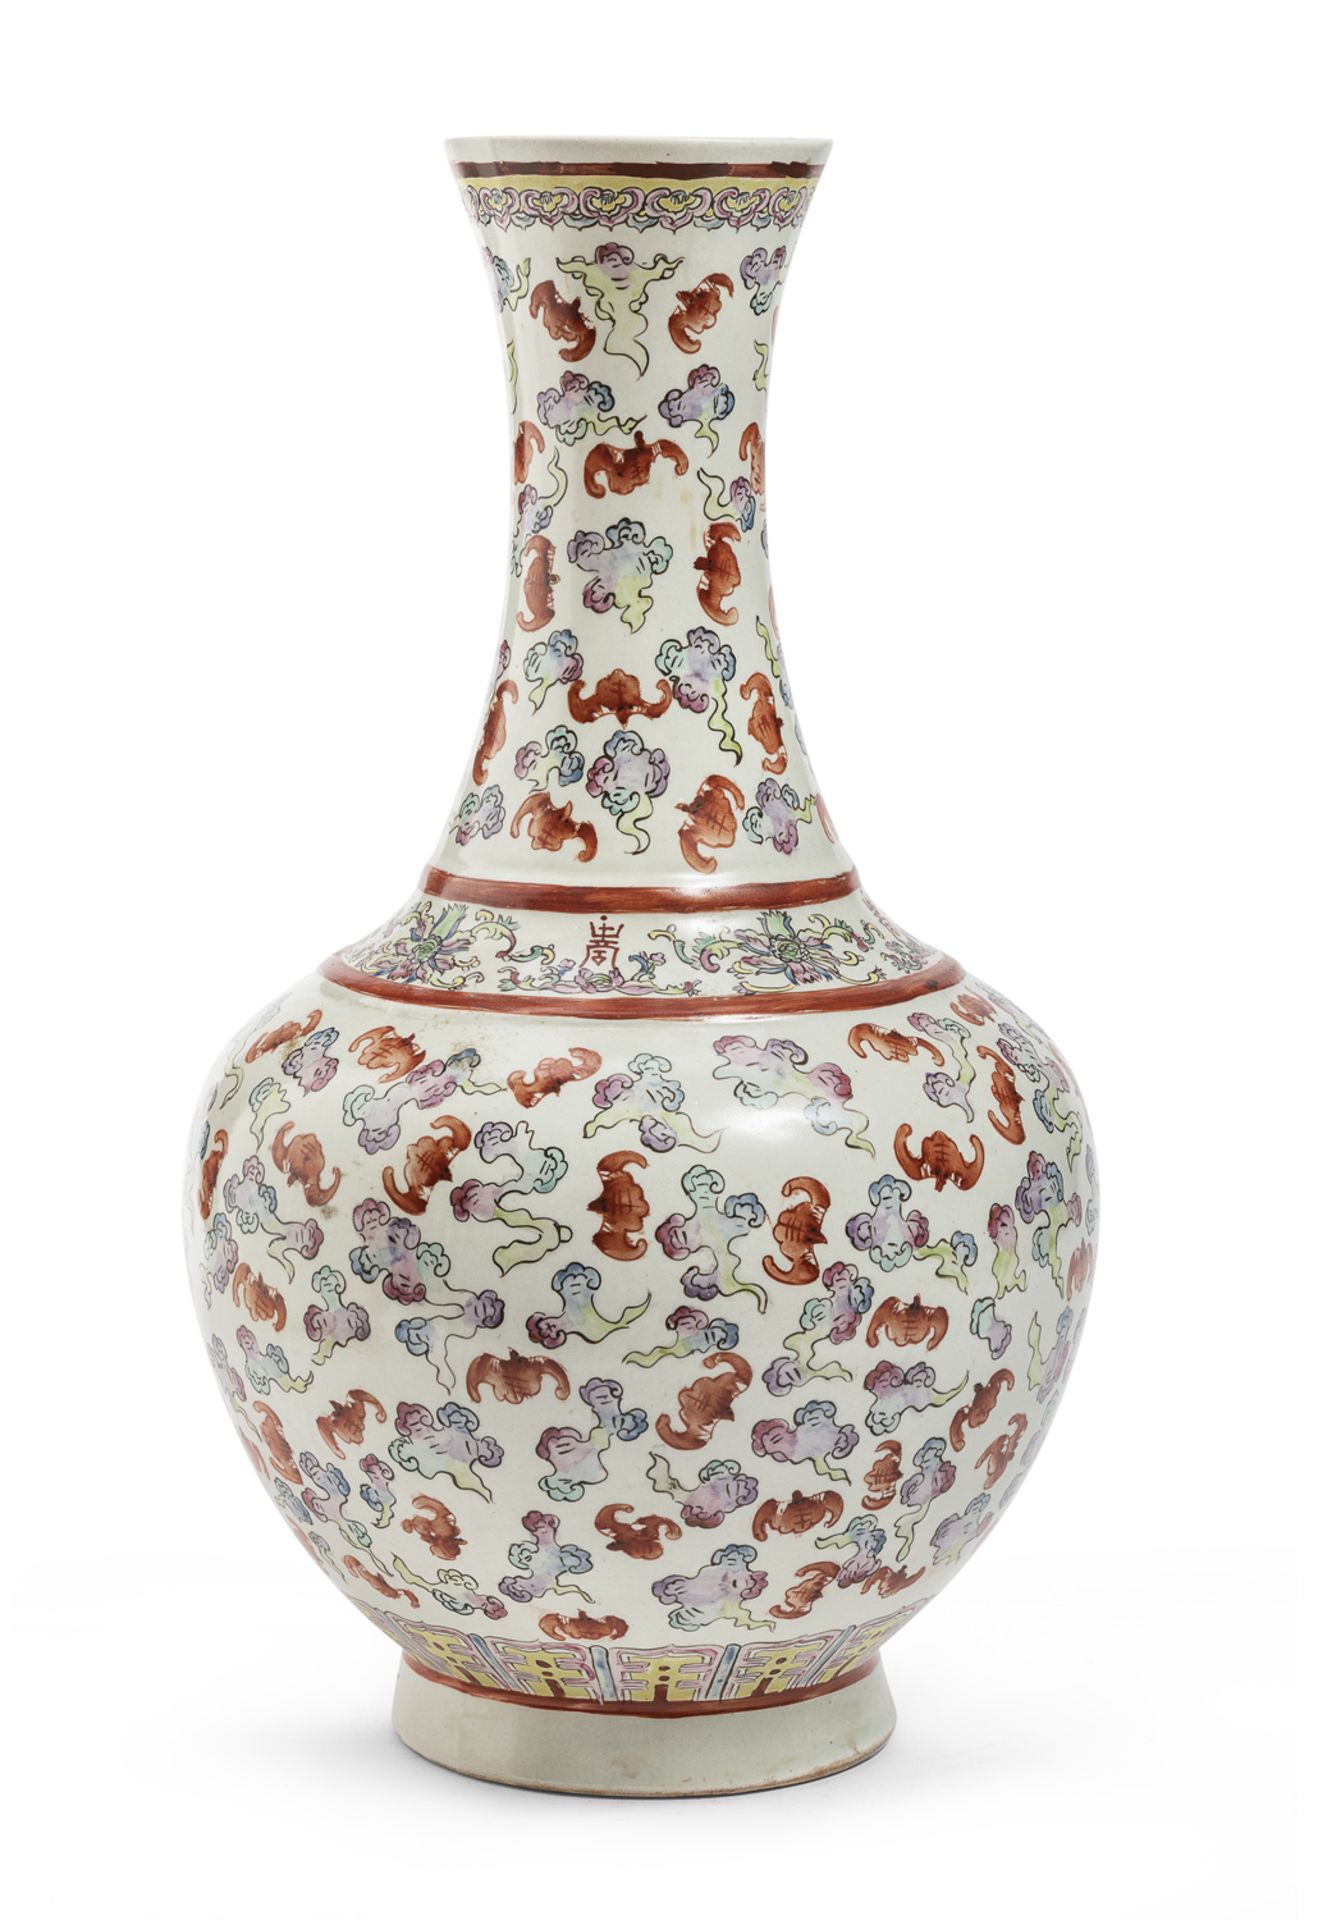 A CHINESE POLYCHROME ENAMELED PORCELAIN VASE LATE 19TH EARLY 20TH CENTURY.